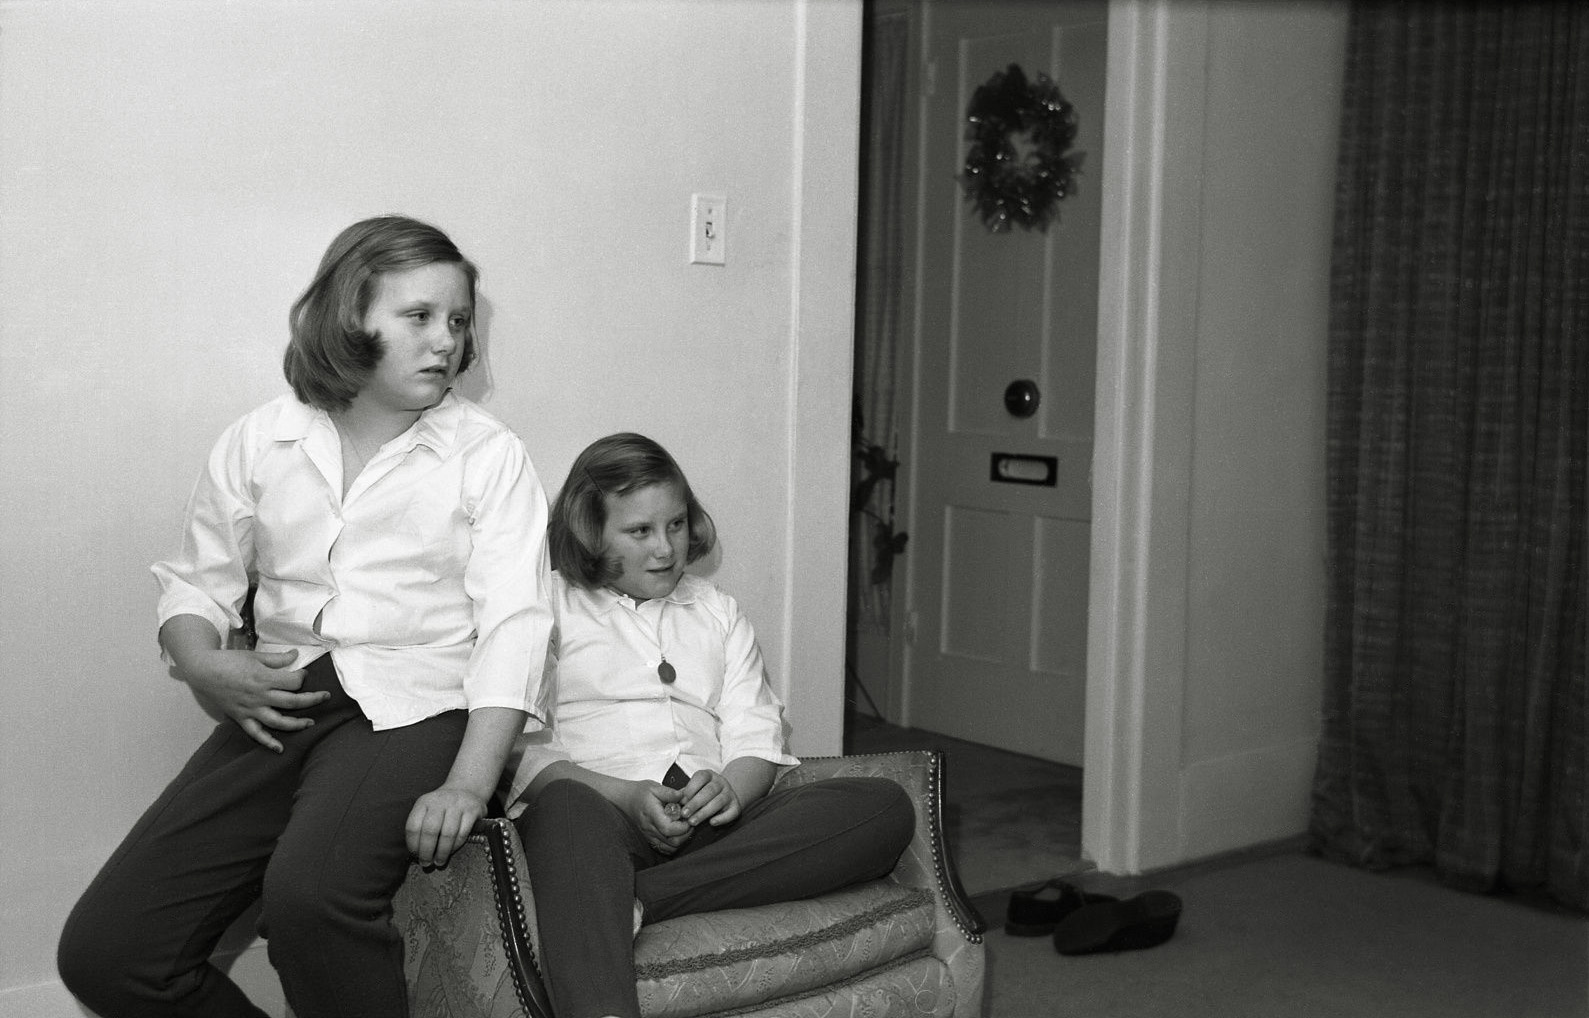 No names included, but look like twin sisters. Envelope which negatives were stored was dated 1963. From my negatives collection. View full size.